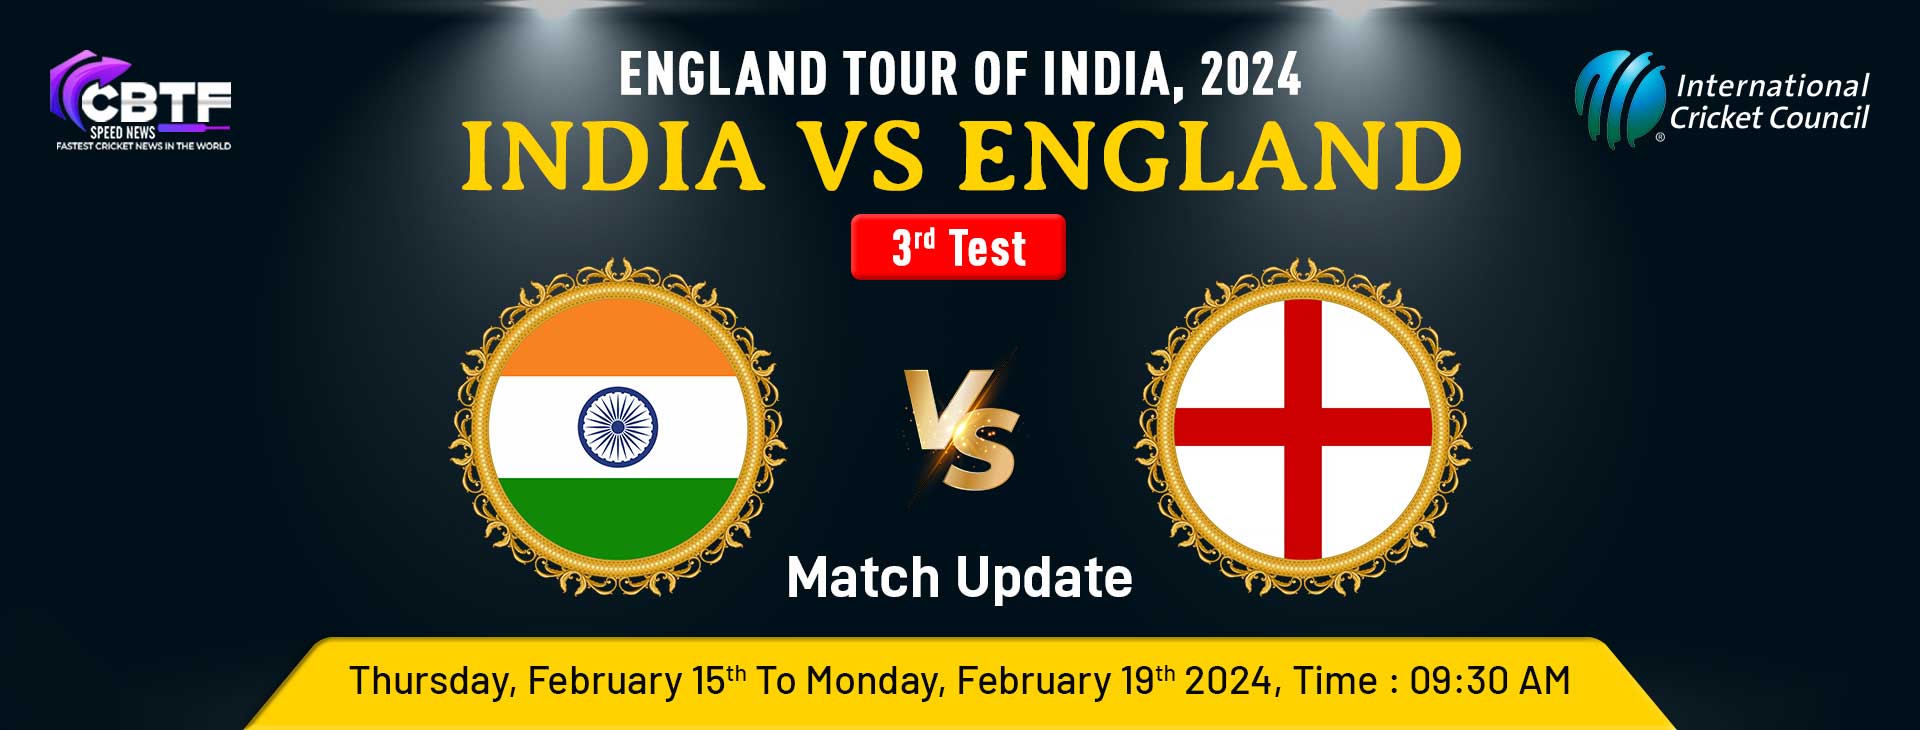 England tour of India, 2024, India vs England, 3rd Test, Day 1, Match